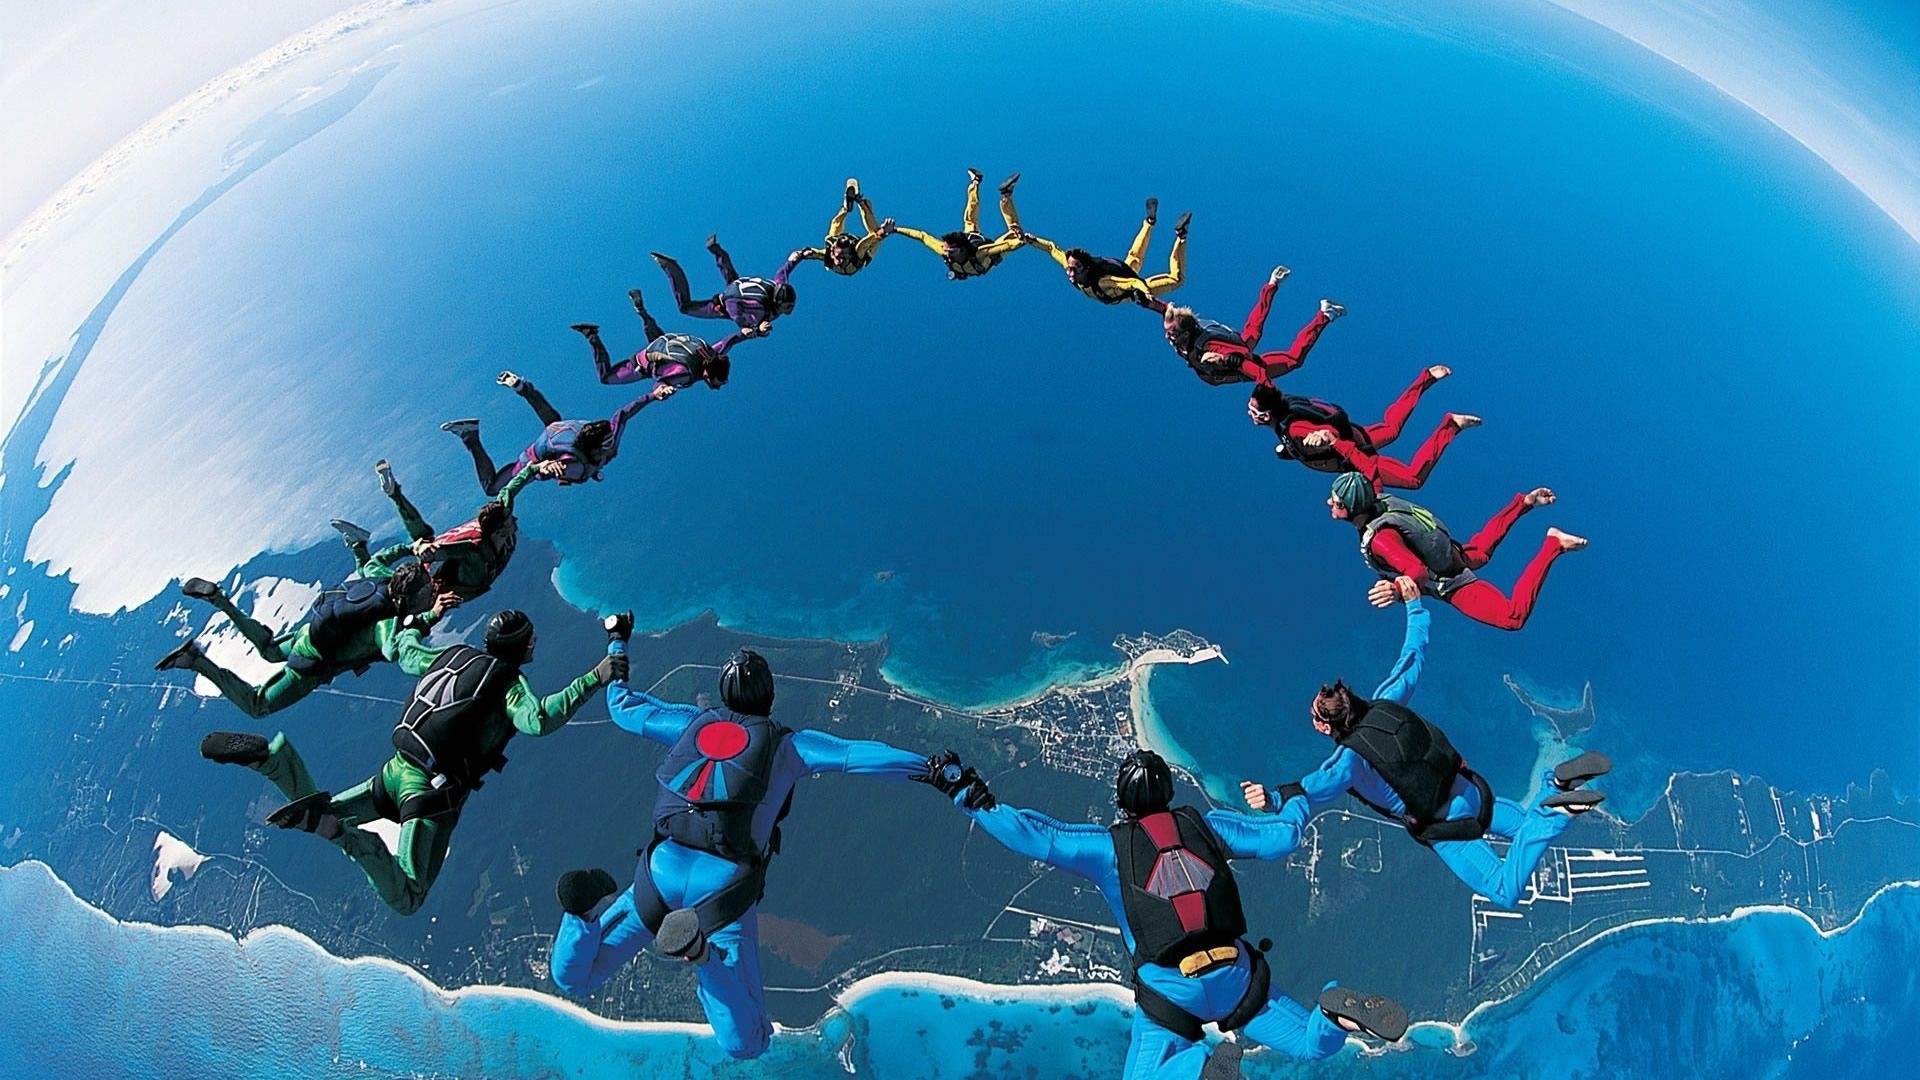 sports, Skydiving, Extreme, Sports, Parachute, 1920x1080, Wallpaper, Sports, Extreme, Sports, Hd Wallpaper